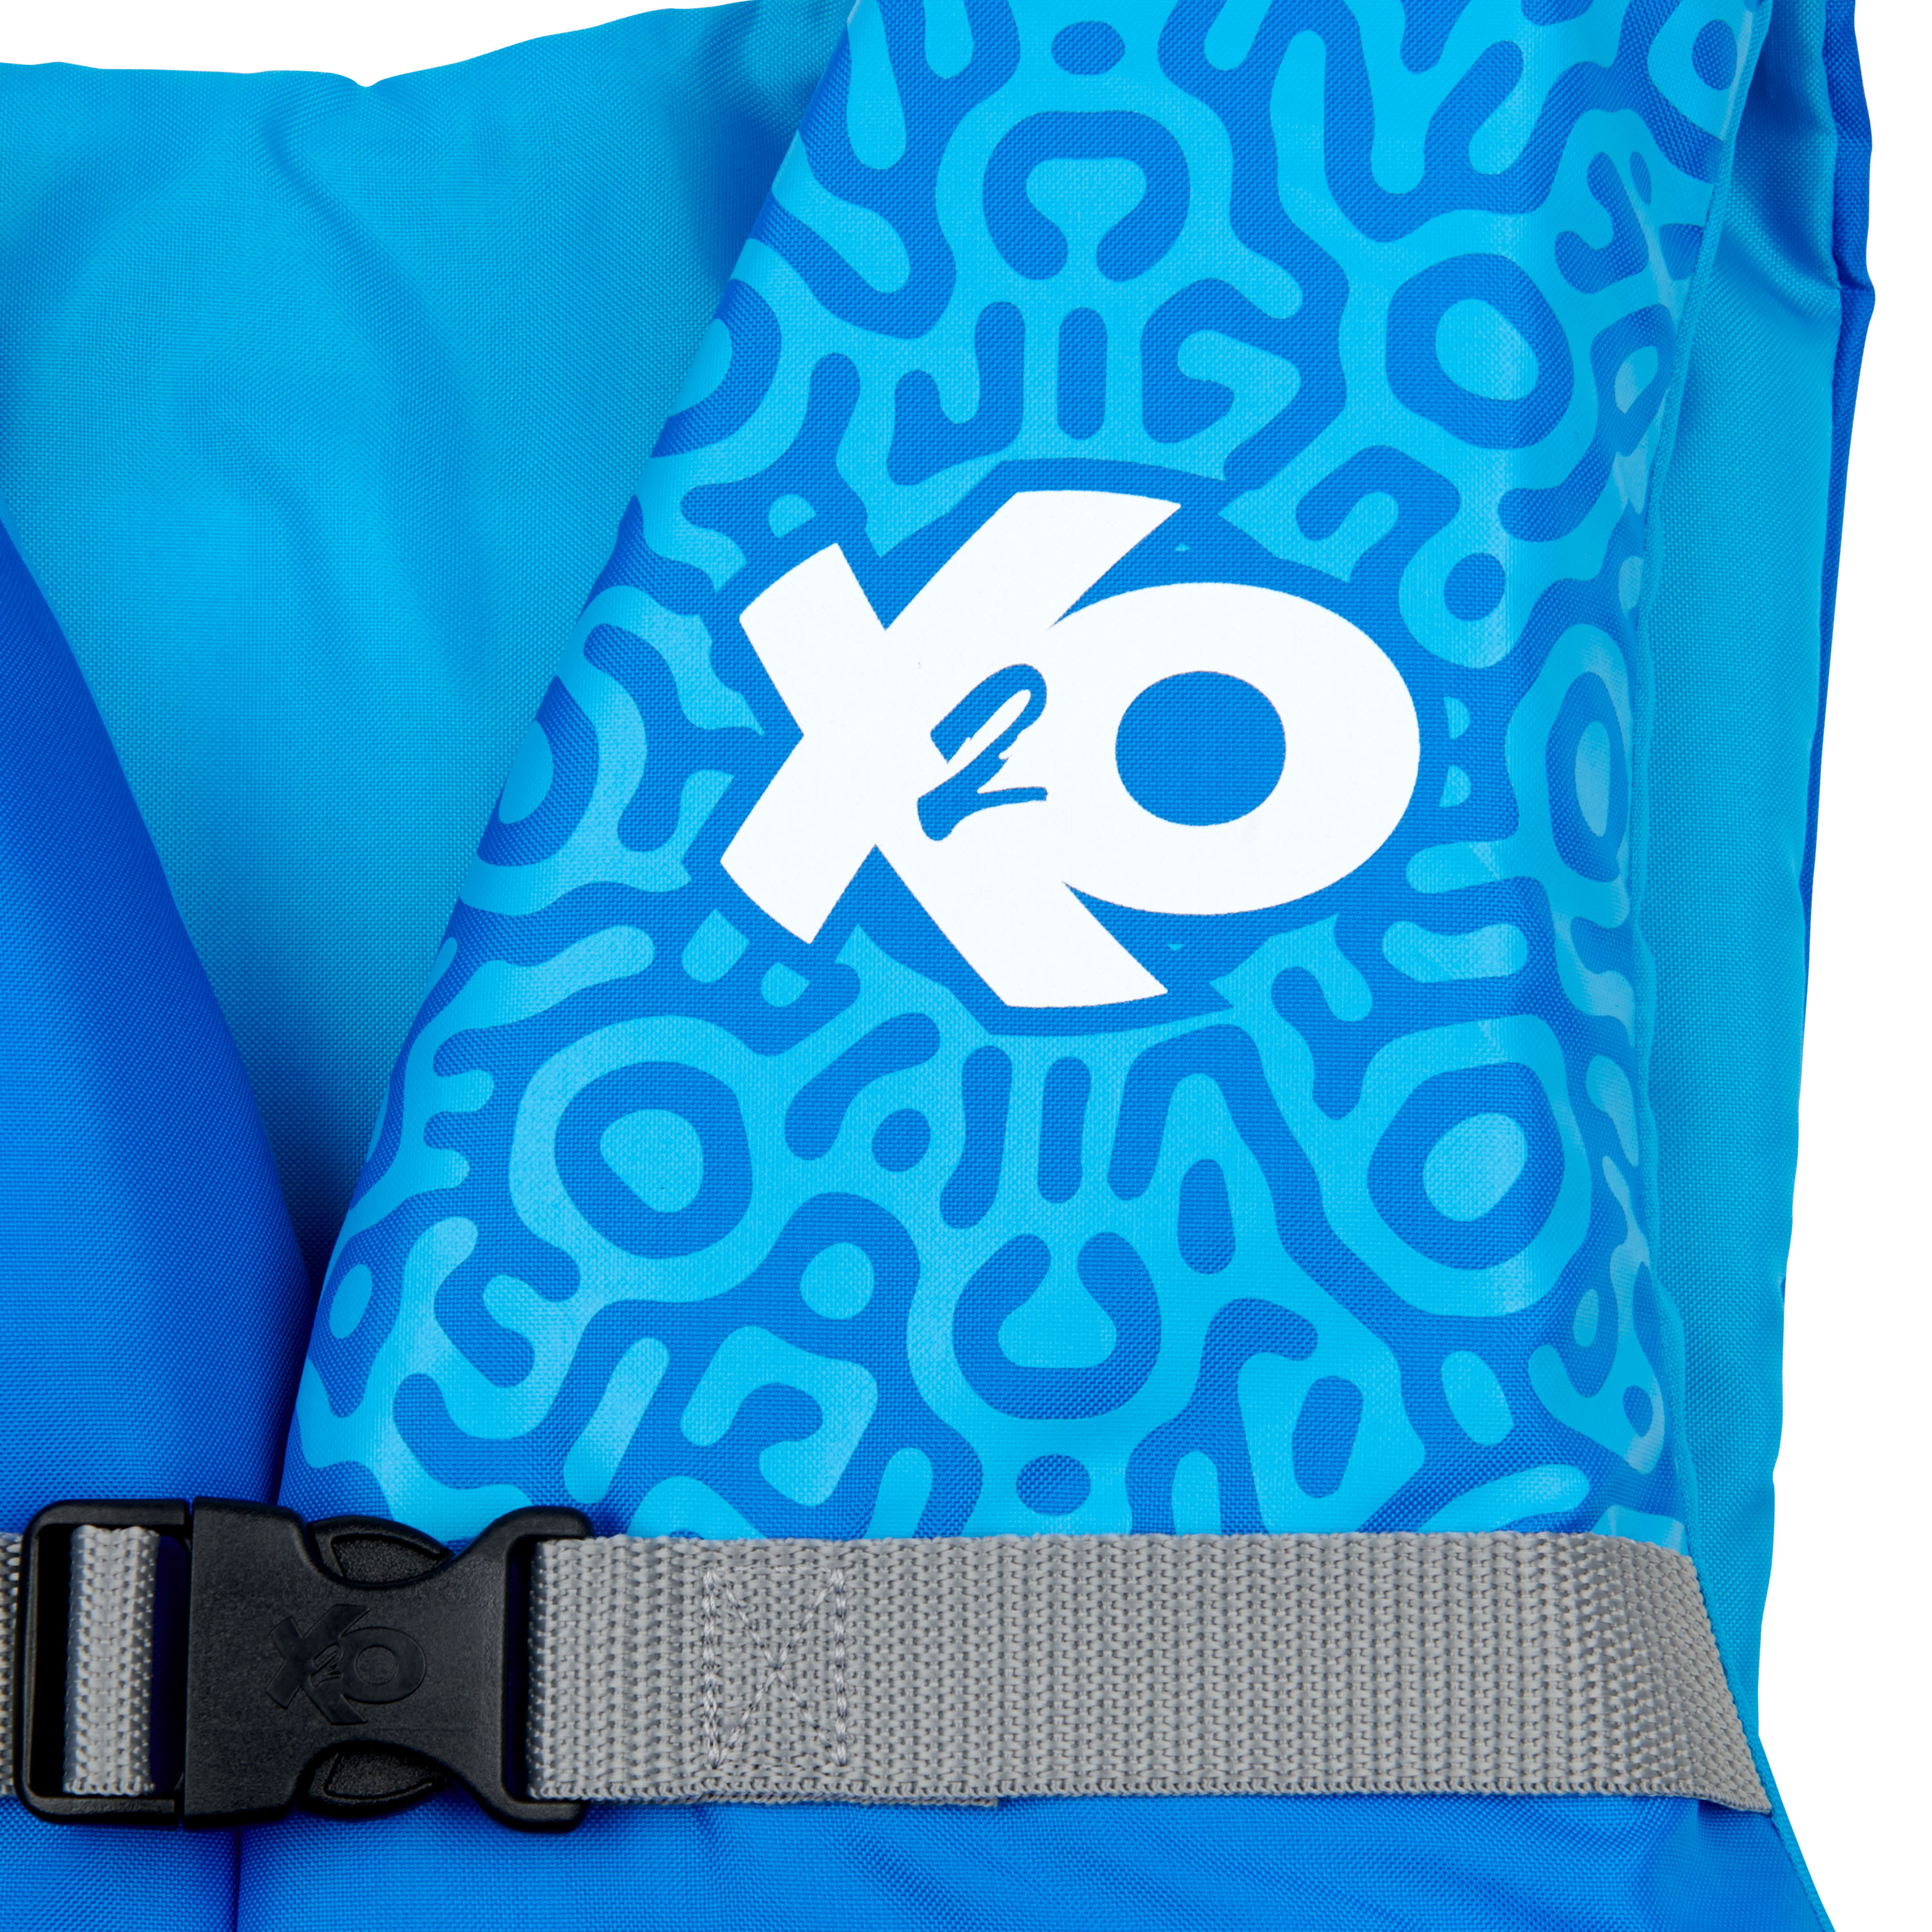 X2O Universal Adult 2X/3X Life Vest and Jacket, (50" - 60" Chest), Blue Ocean Coral - image 3 of 11